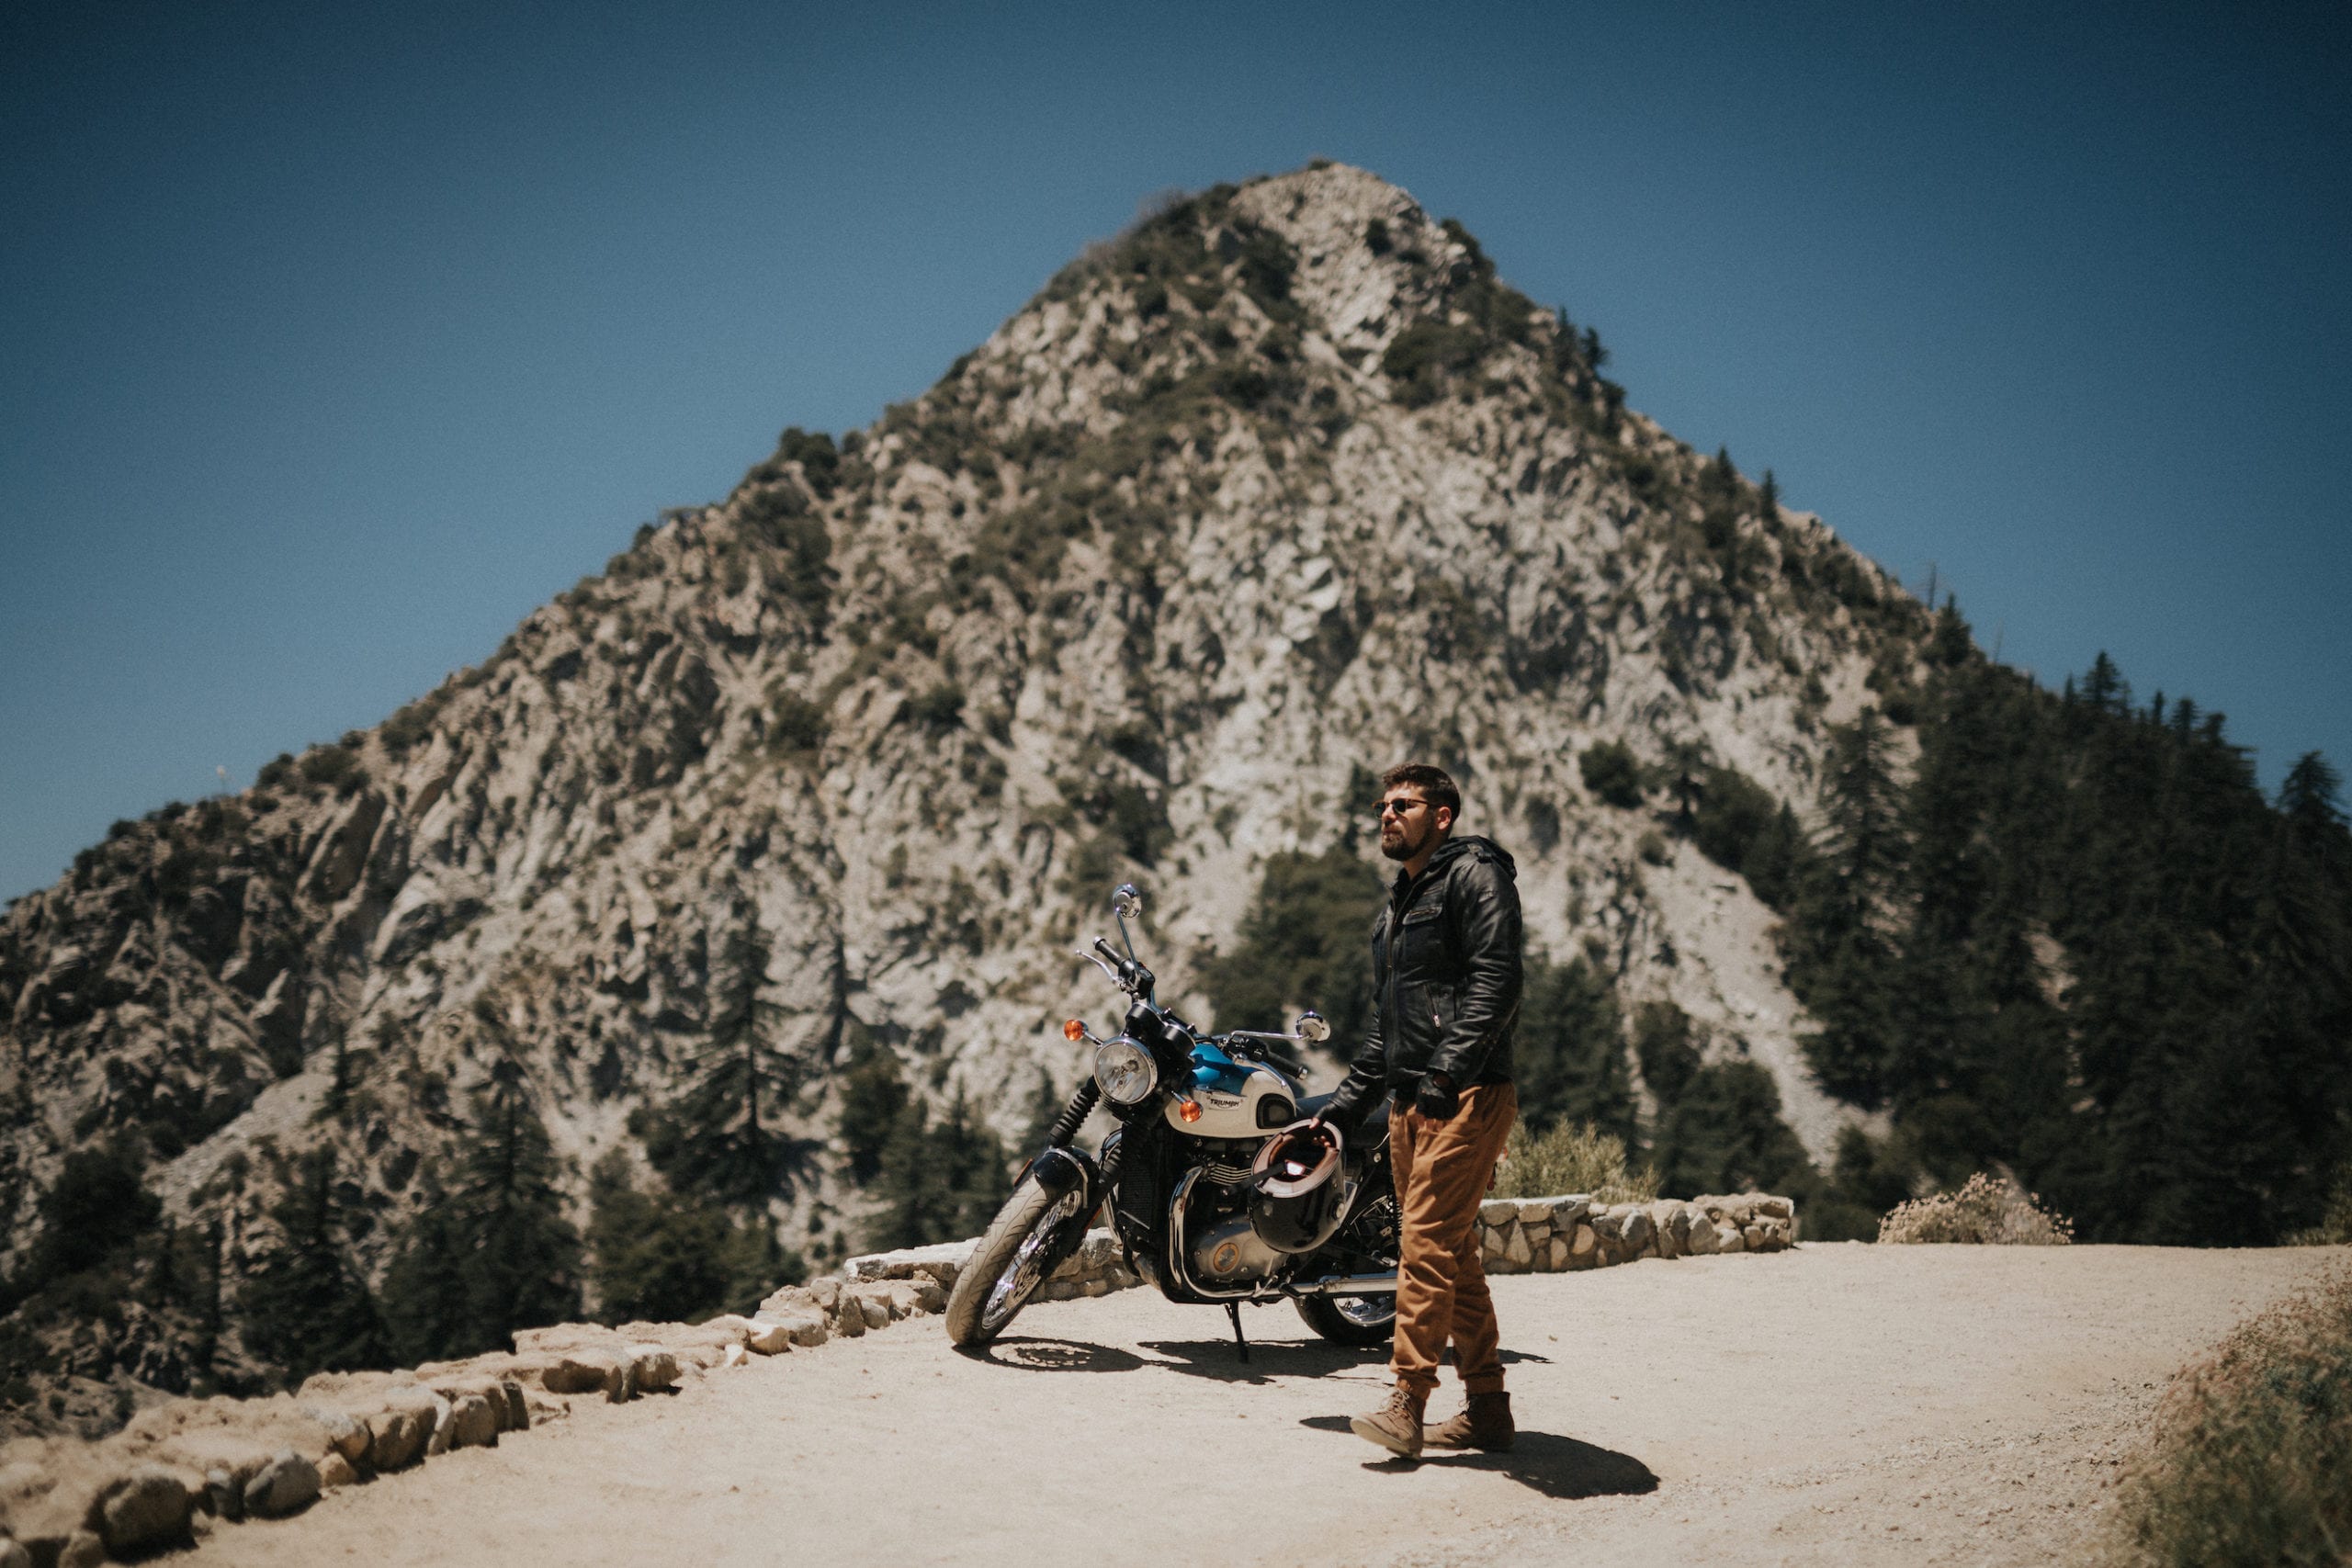 Motorcycle rider standing in front of a Bonneville T100 motorcycle with mountain peak in the backdrop